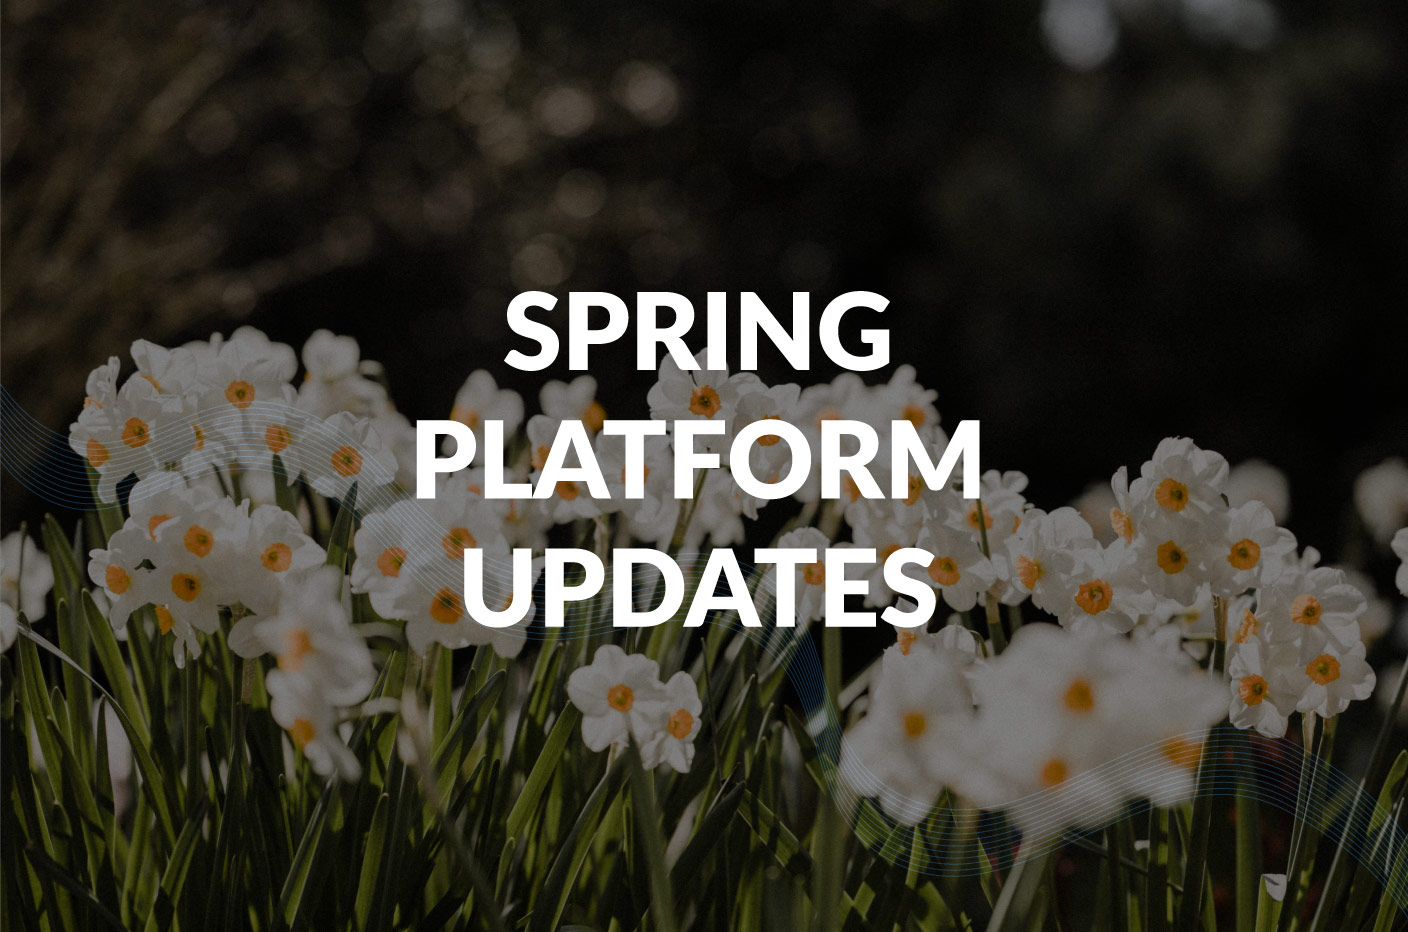 New features are in bloom!